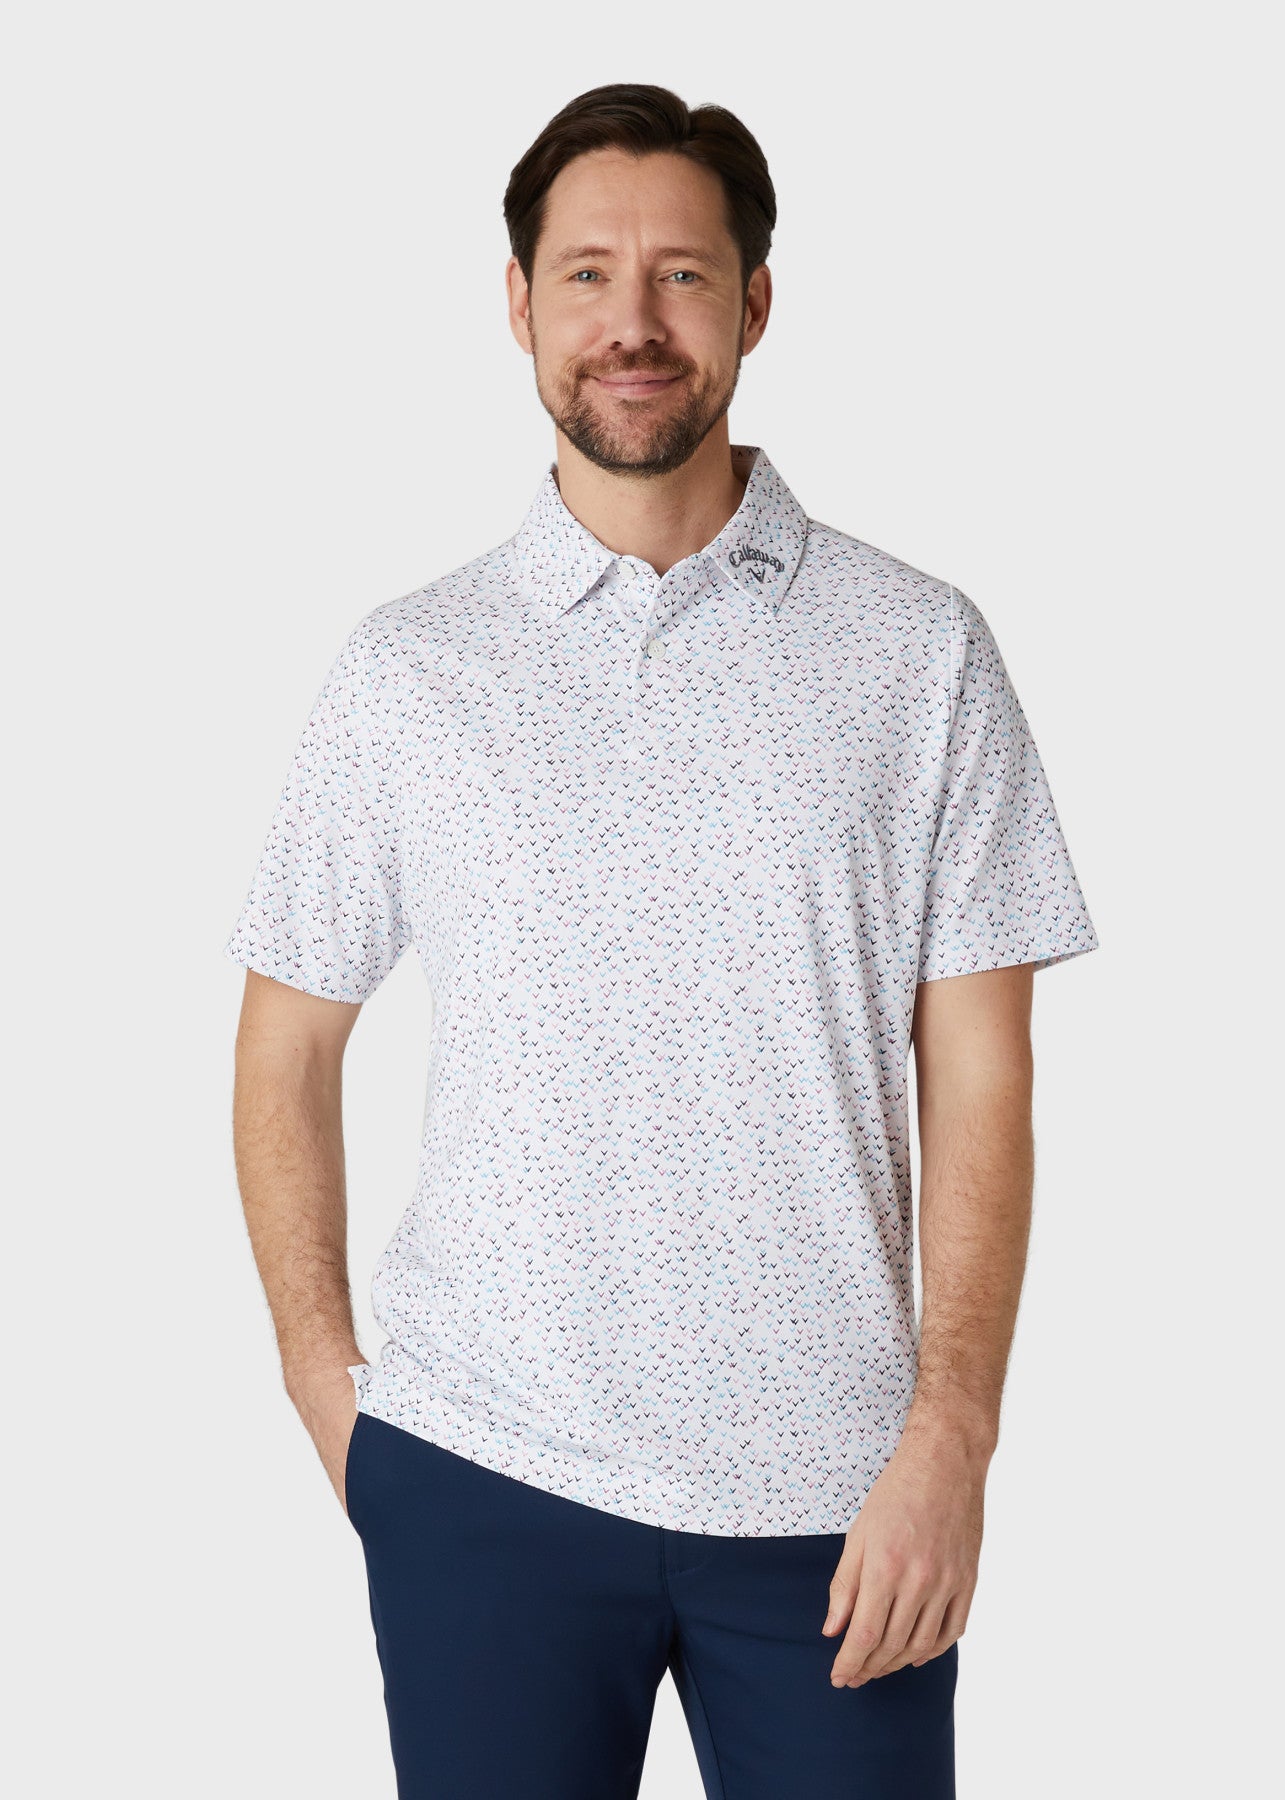 View Short Sleeve Chev All Over Confetti Print Polo Shirt In Bright White information